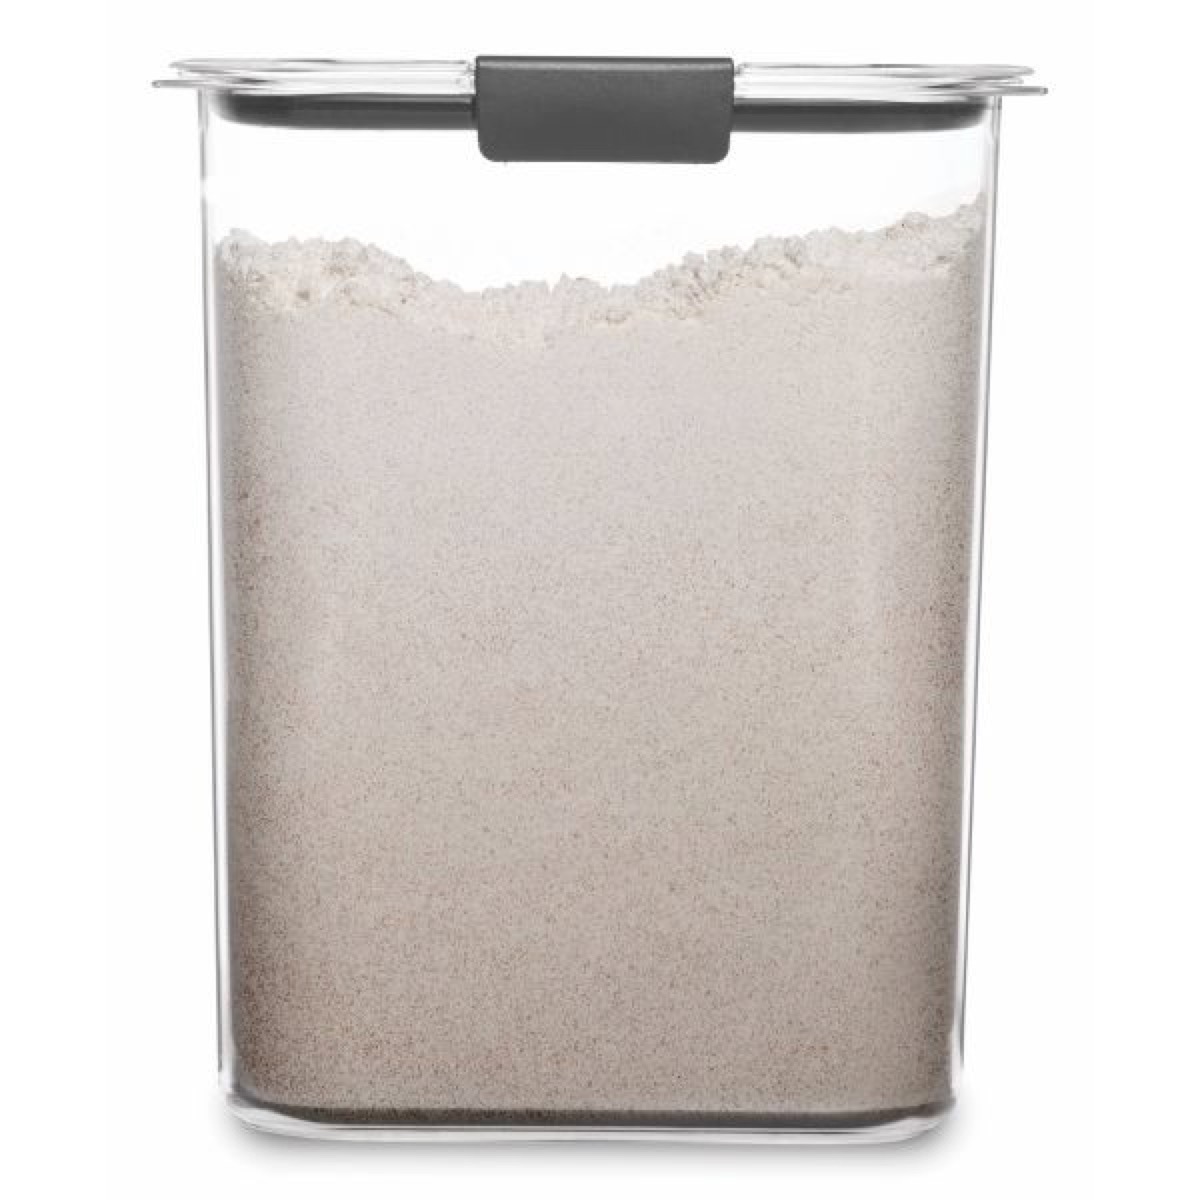 product still from Target of rubbermaid storage container